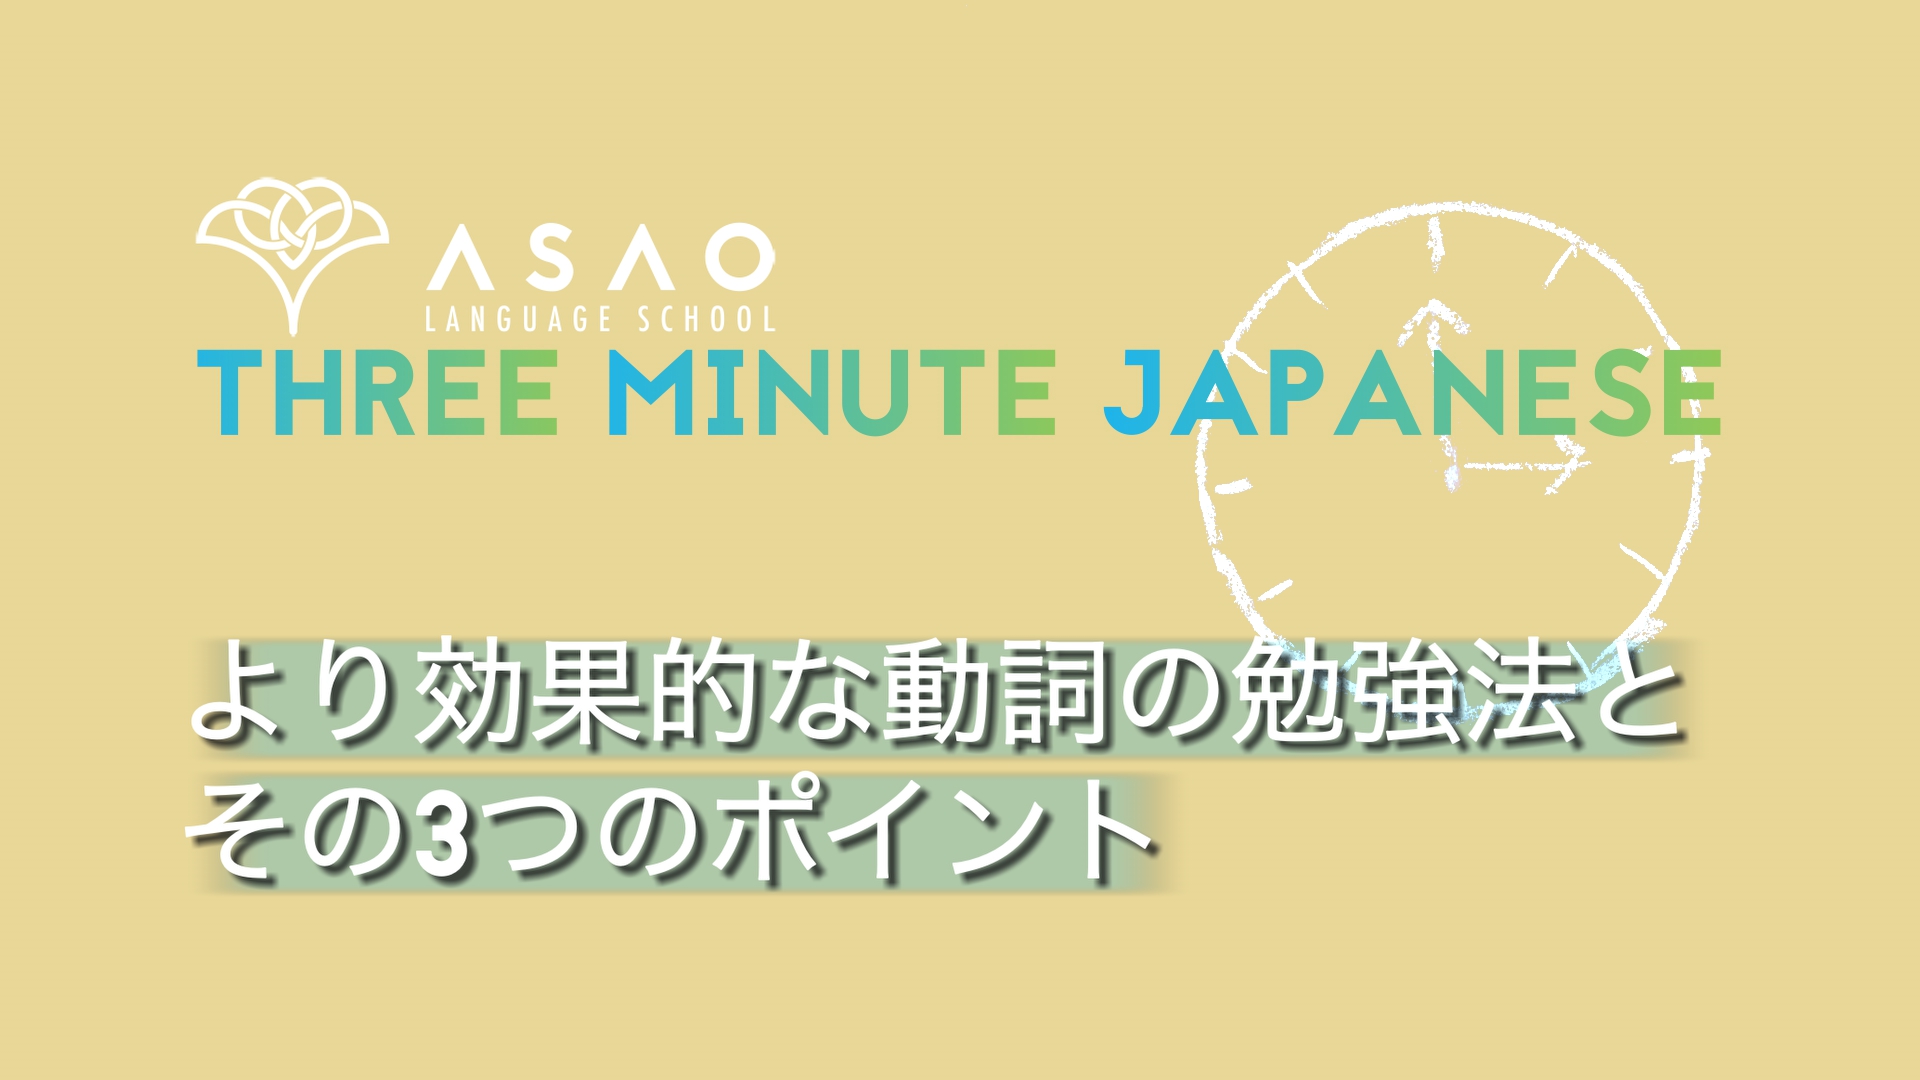 Learn Japanese - Japanese in 3 minutes - Part 4 - Edited